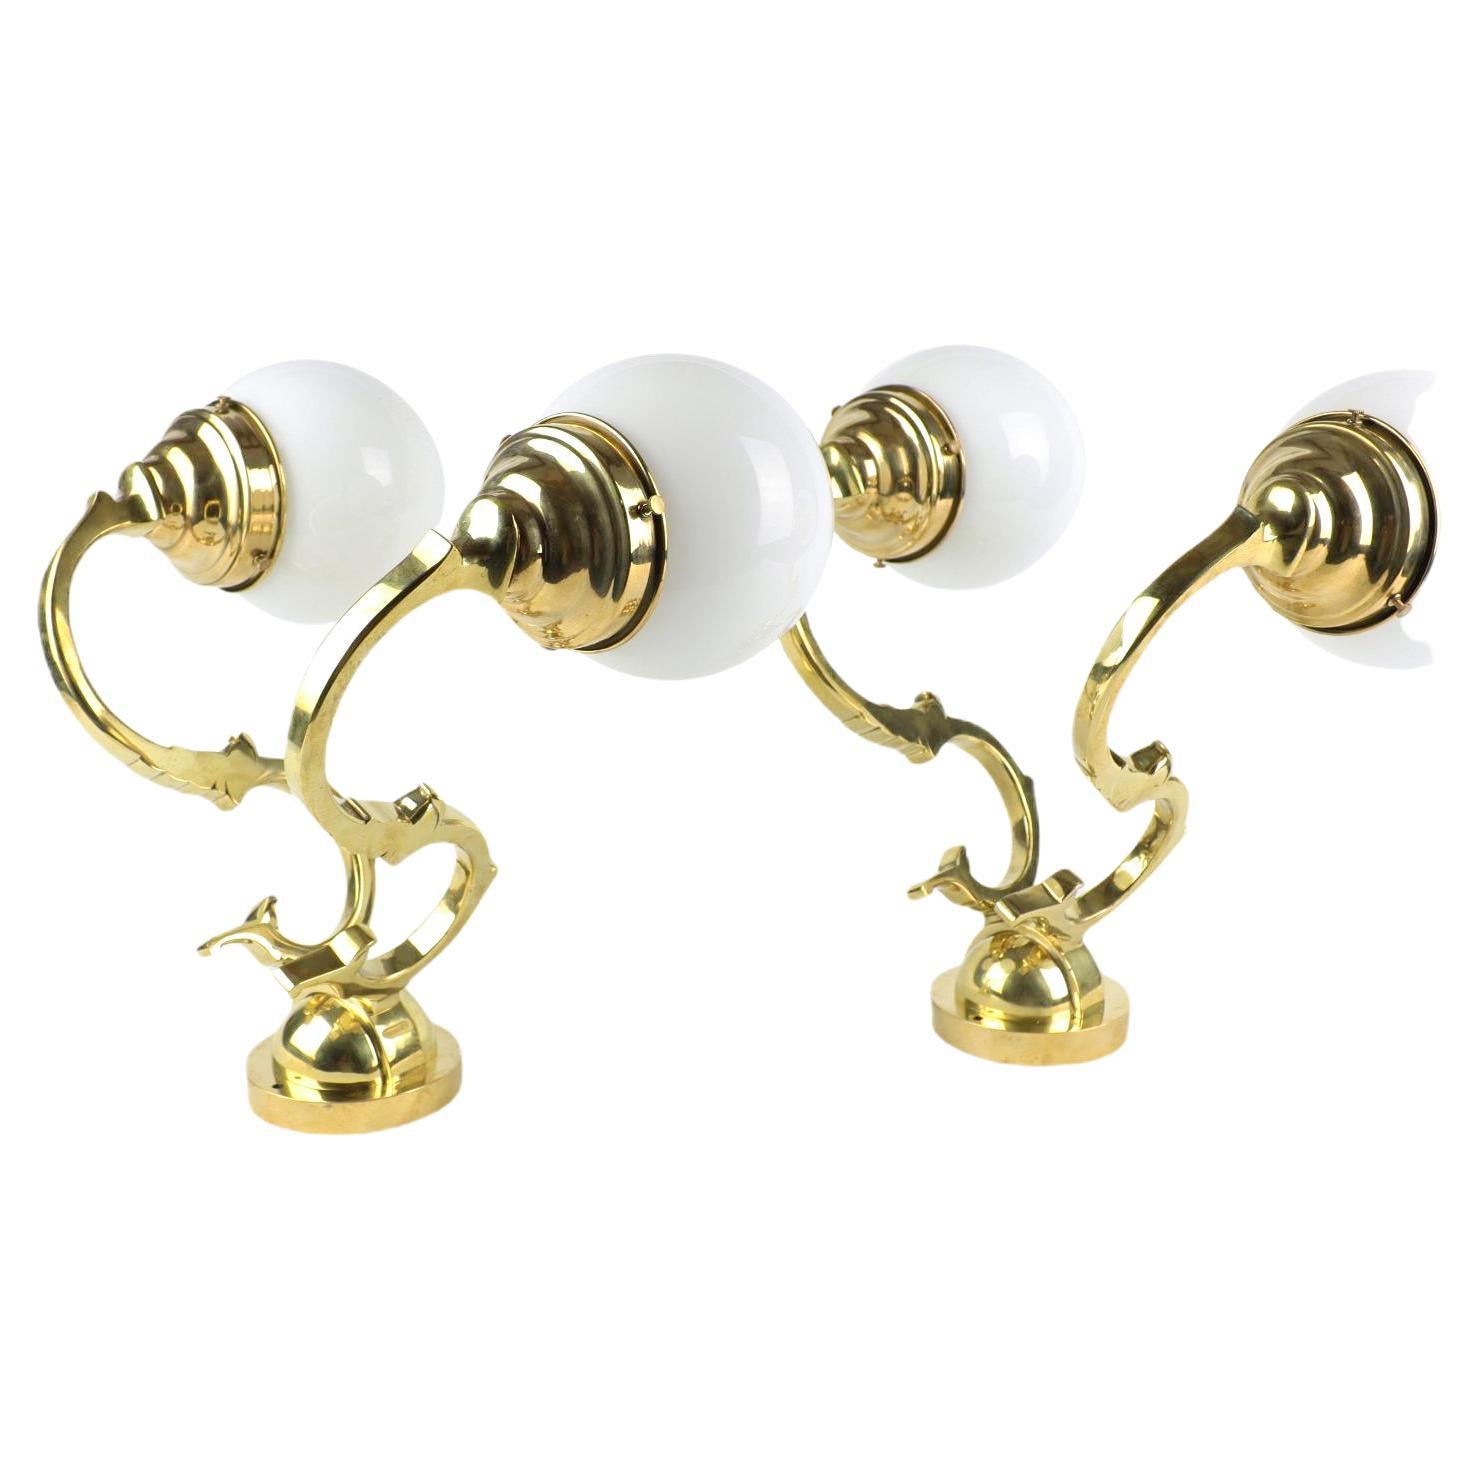 Exclusive Art Deco Wall Brass Pair Lamps